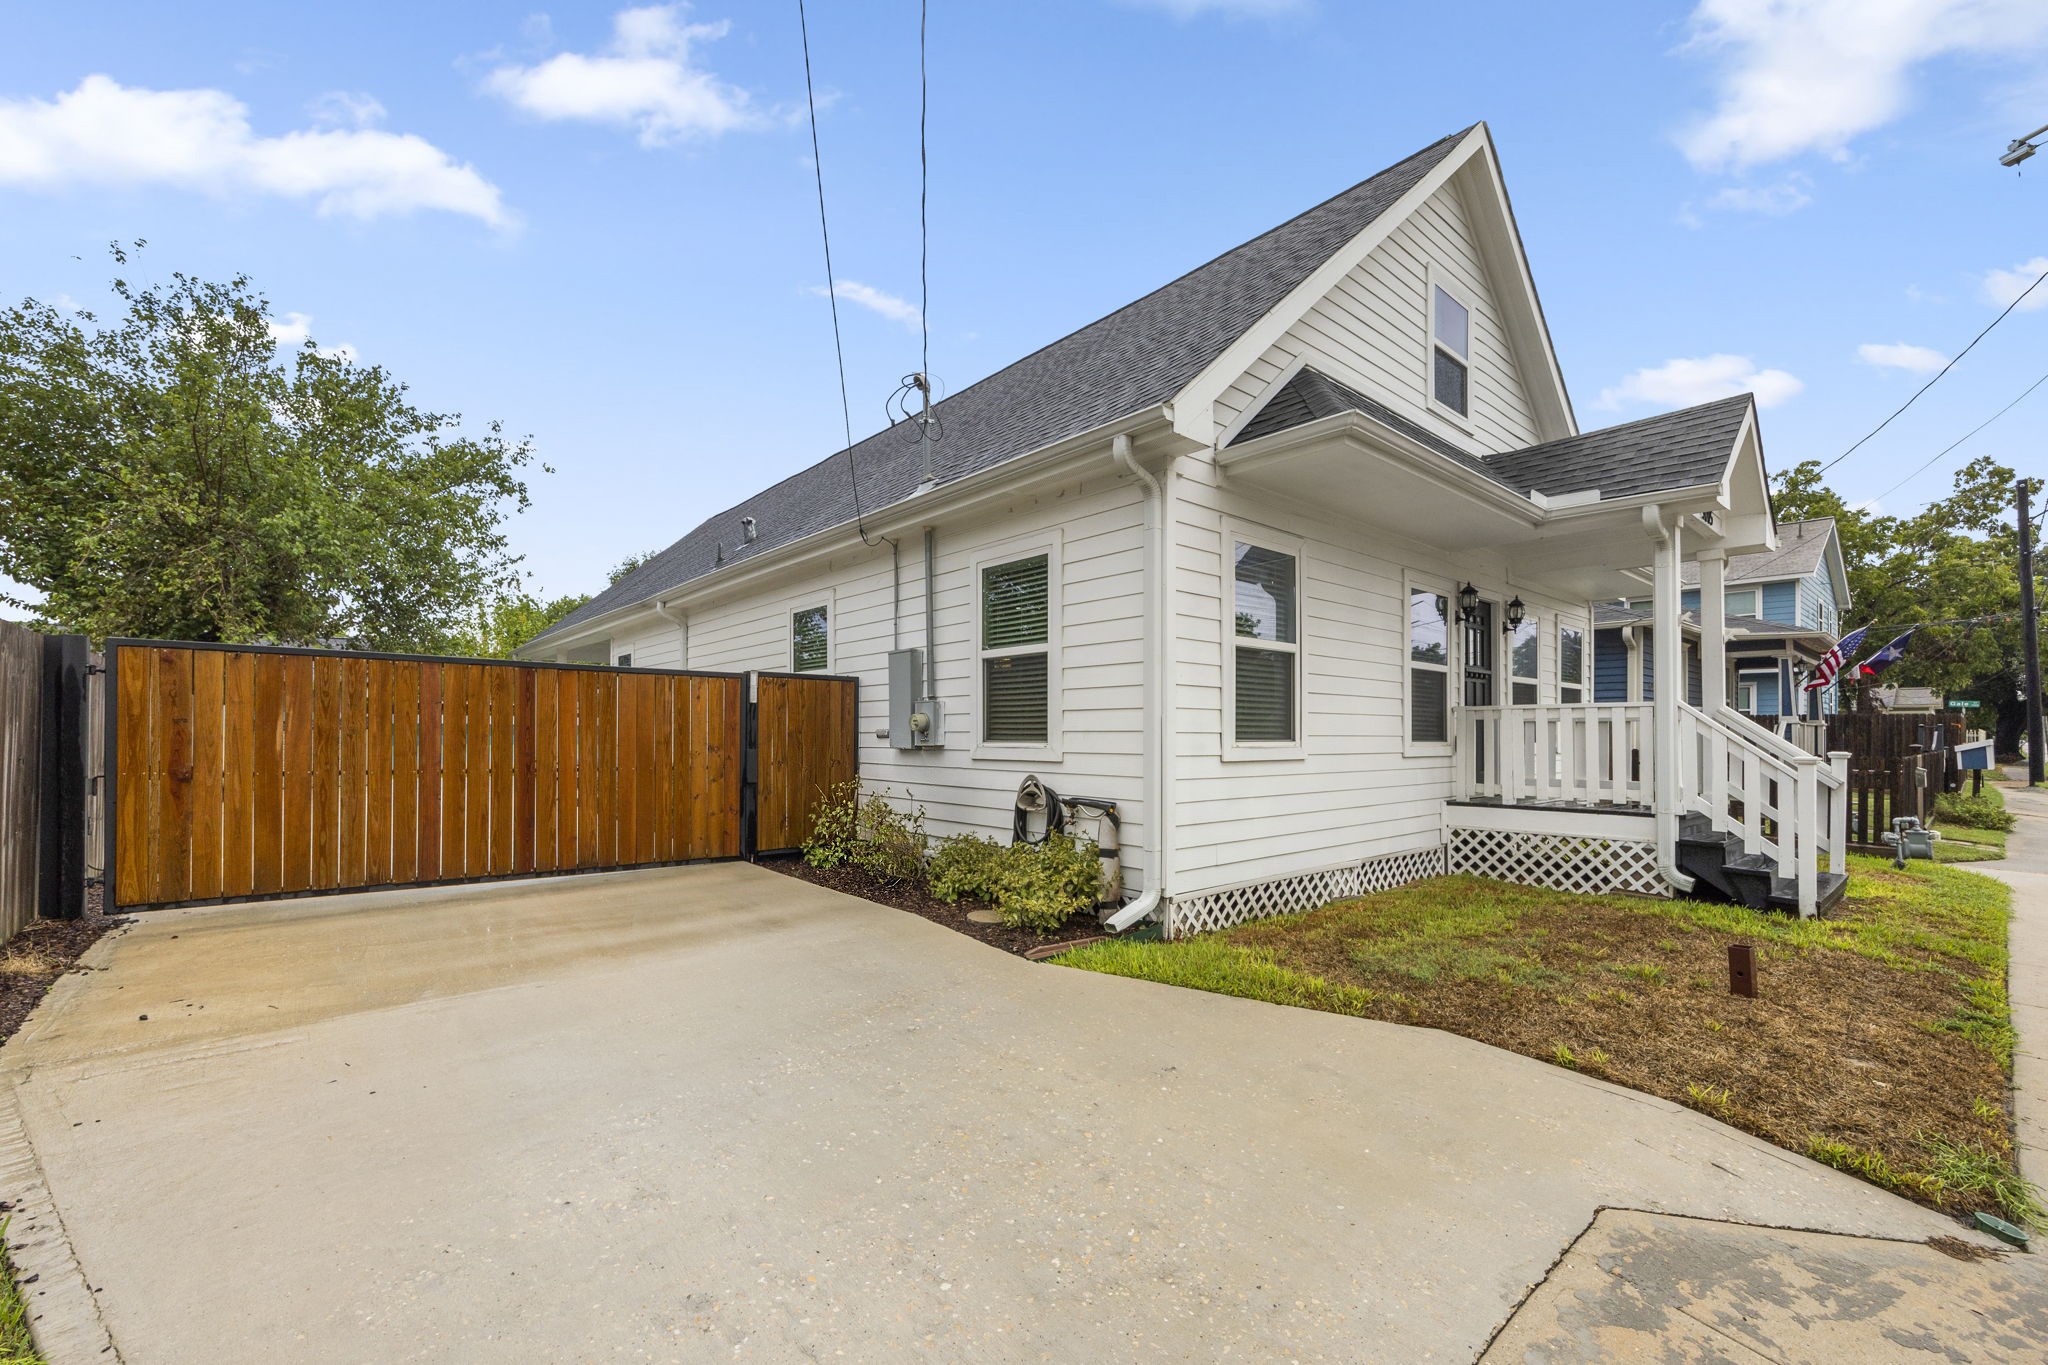 Welcome to 5005 Hardy St. Minutes from downtown, the Heights and so much more.